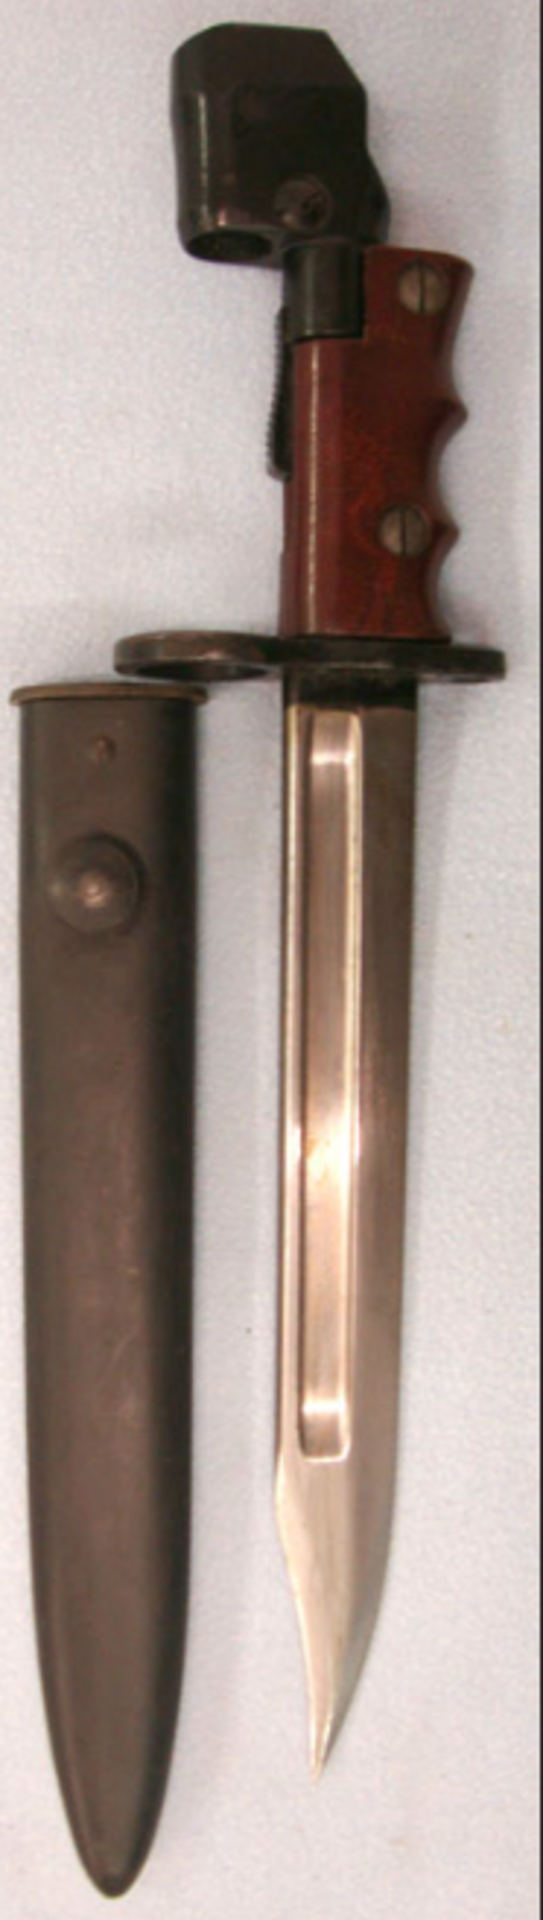 British No 7 MK 1/L Swivelling Pommel Bayonet With Red Composite Grips For No 4 Rifles and Scabbard - Image 3 of 3